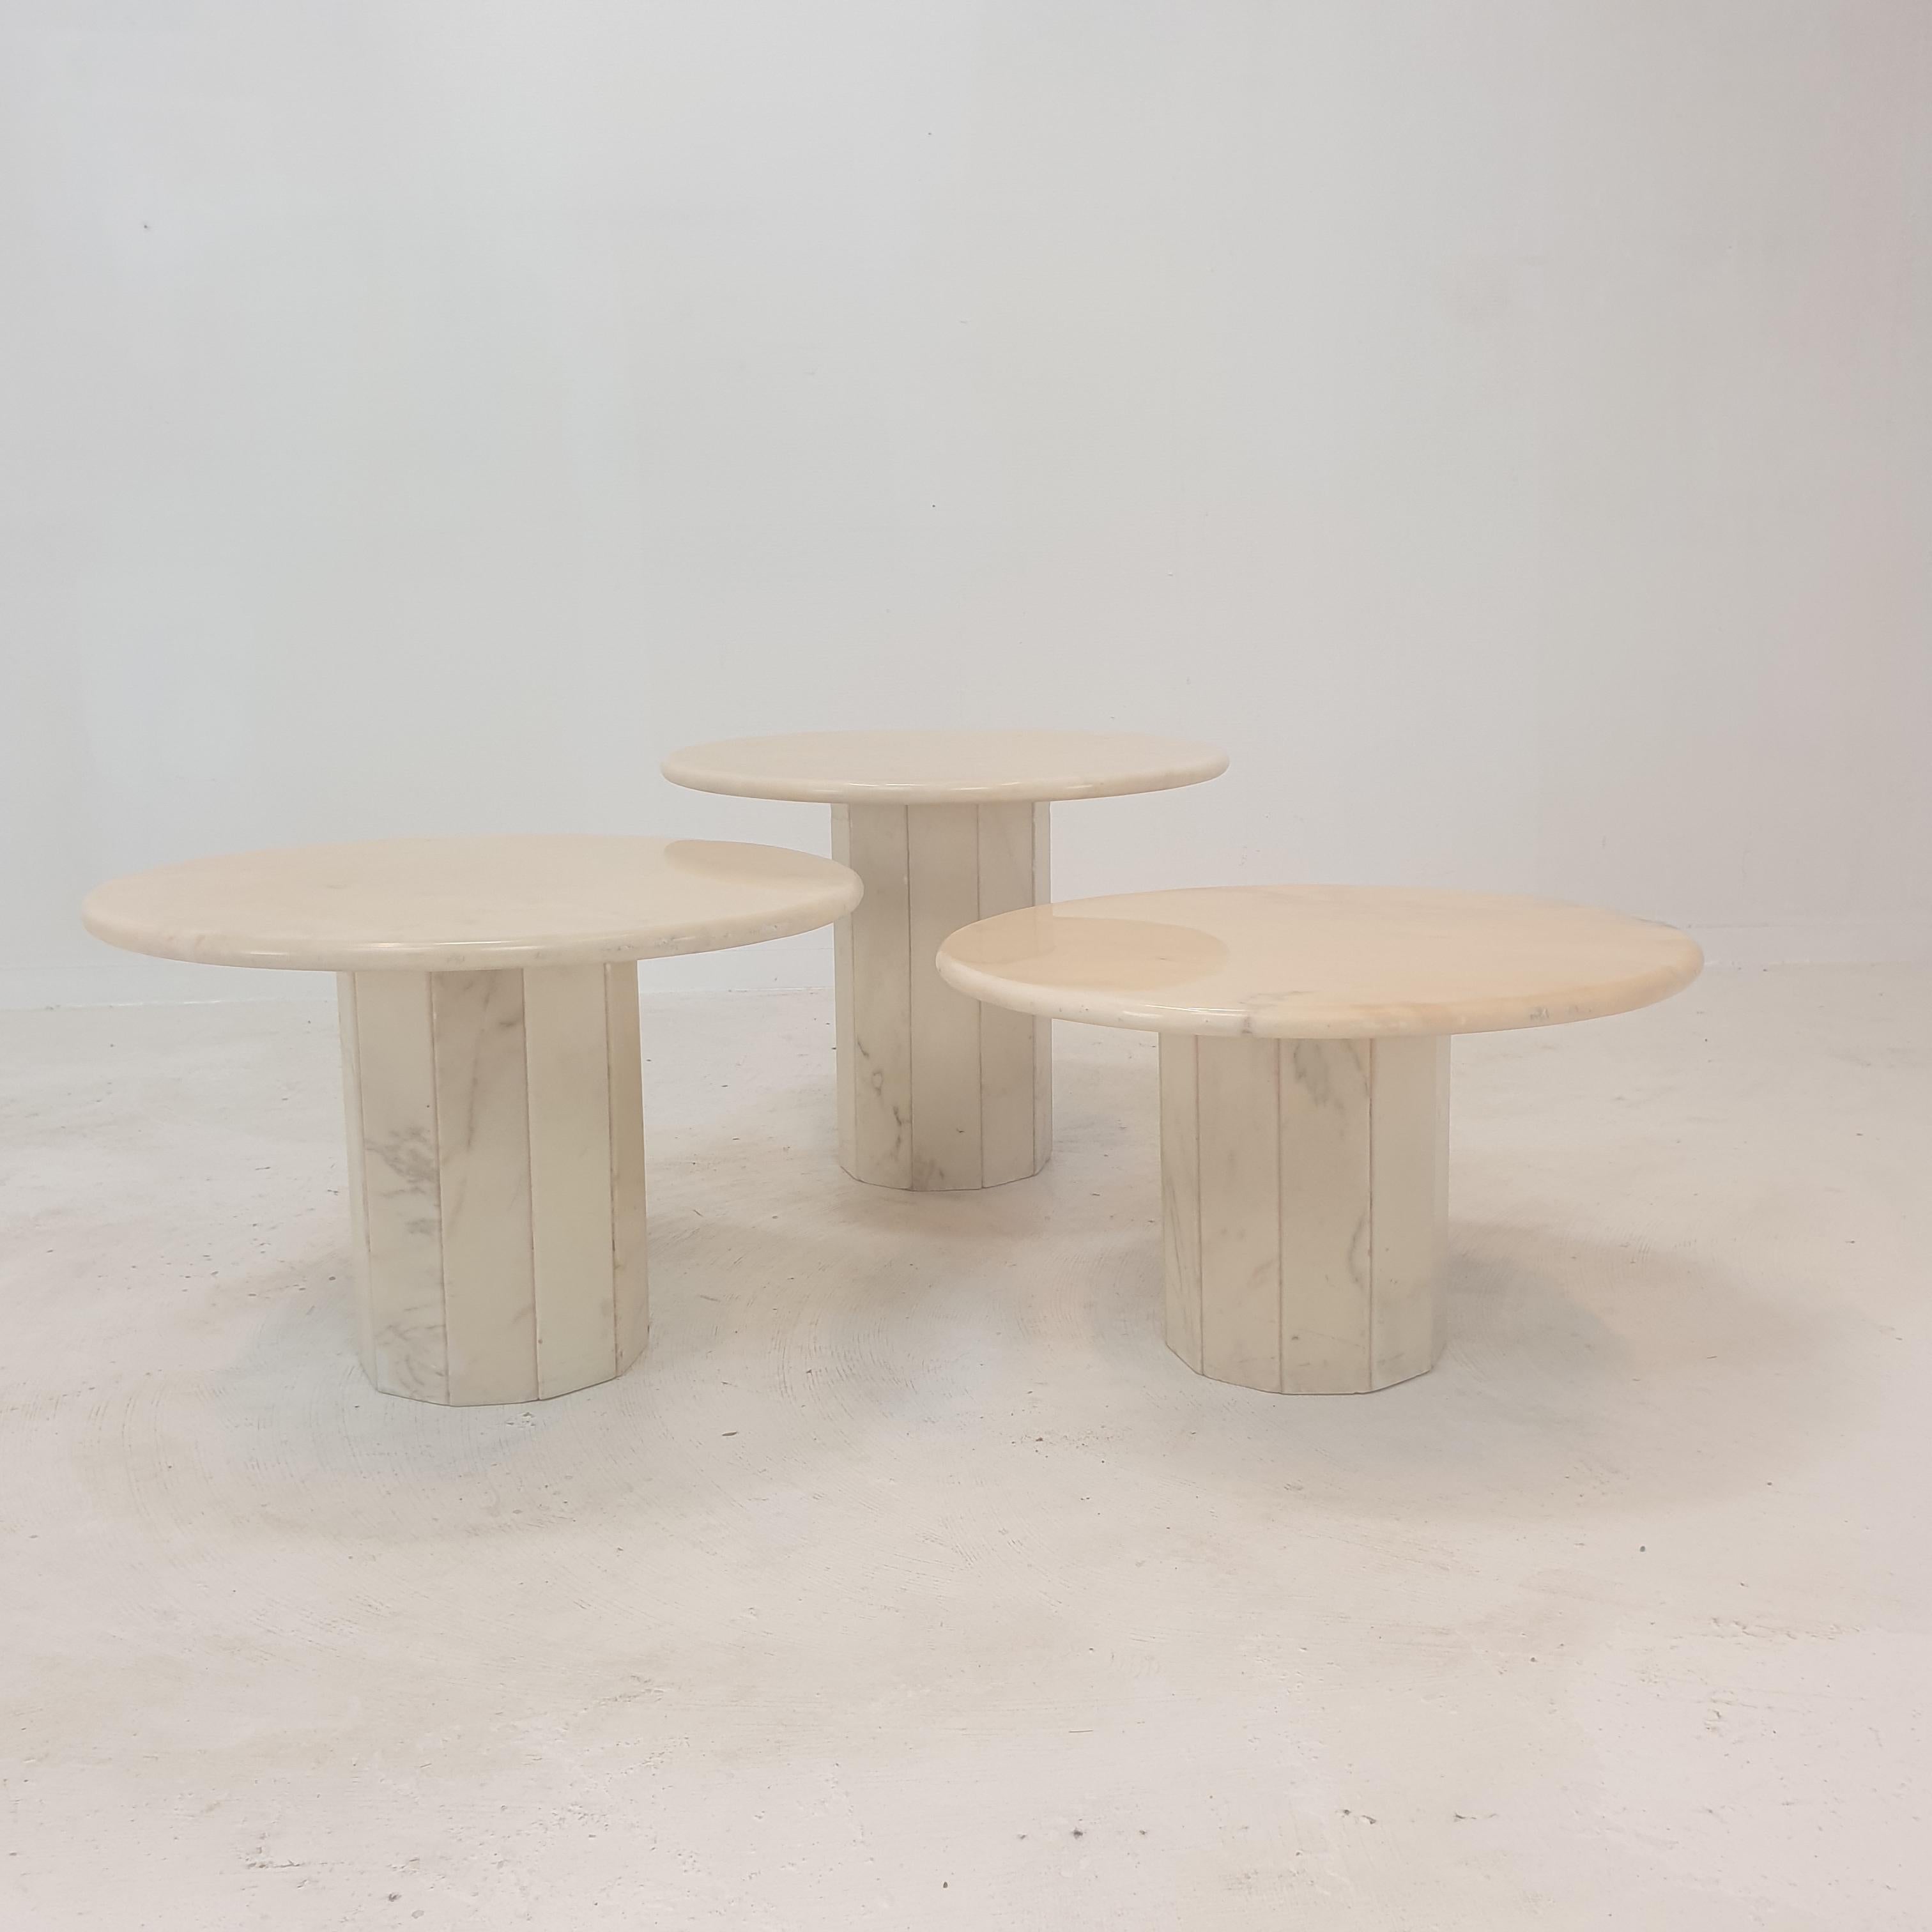 Hand-Crafted Set of 3 Italian Marble Side Tables, 1970s For Sale